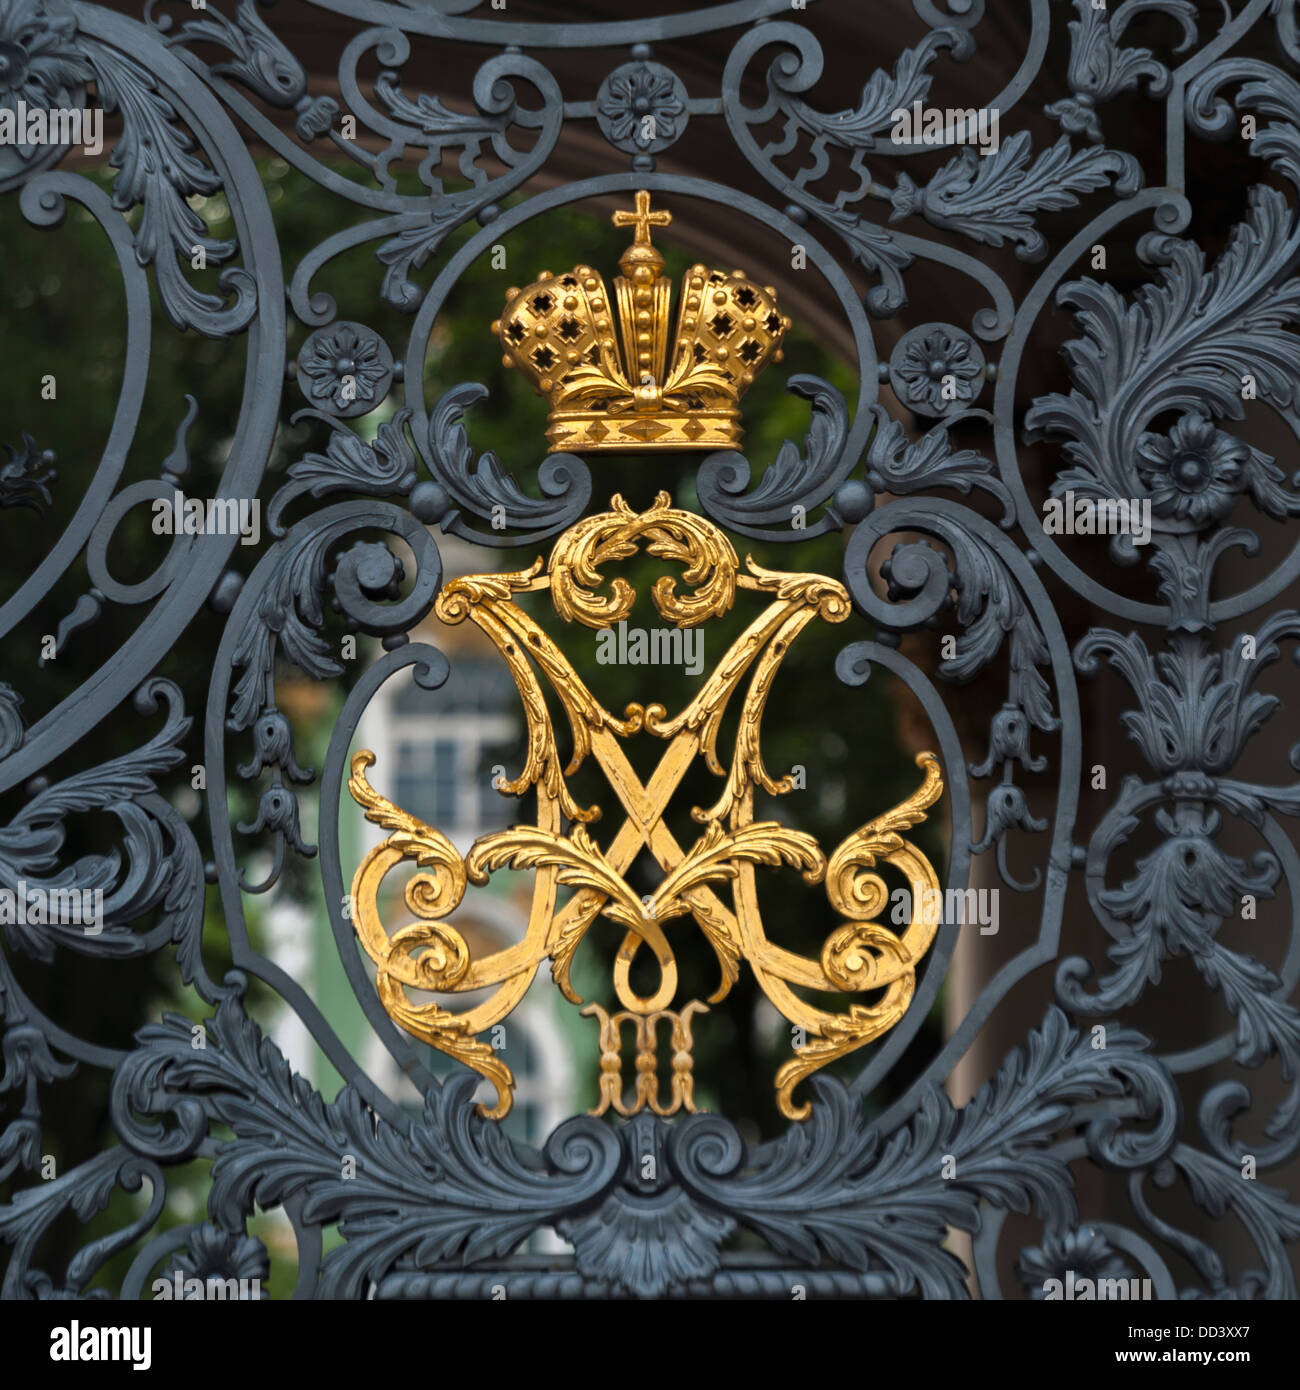 Gold Crown And Black Metal Design On The Gate To Winter Palace; St. Petersburg, Russia Stock Photo